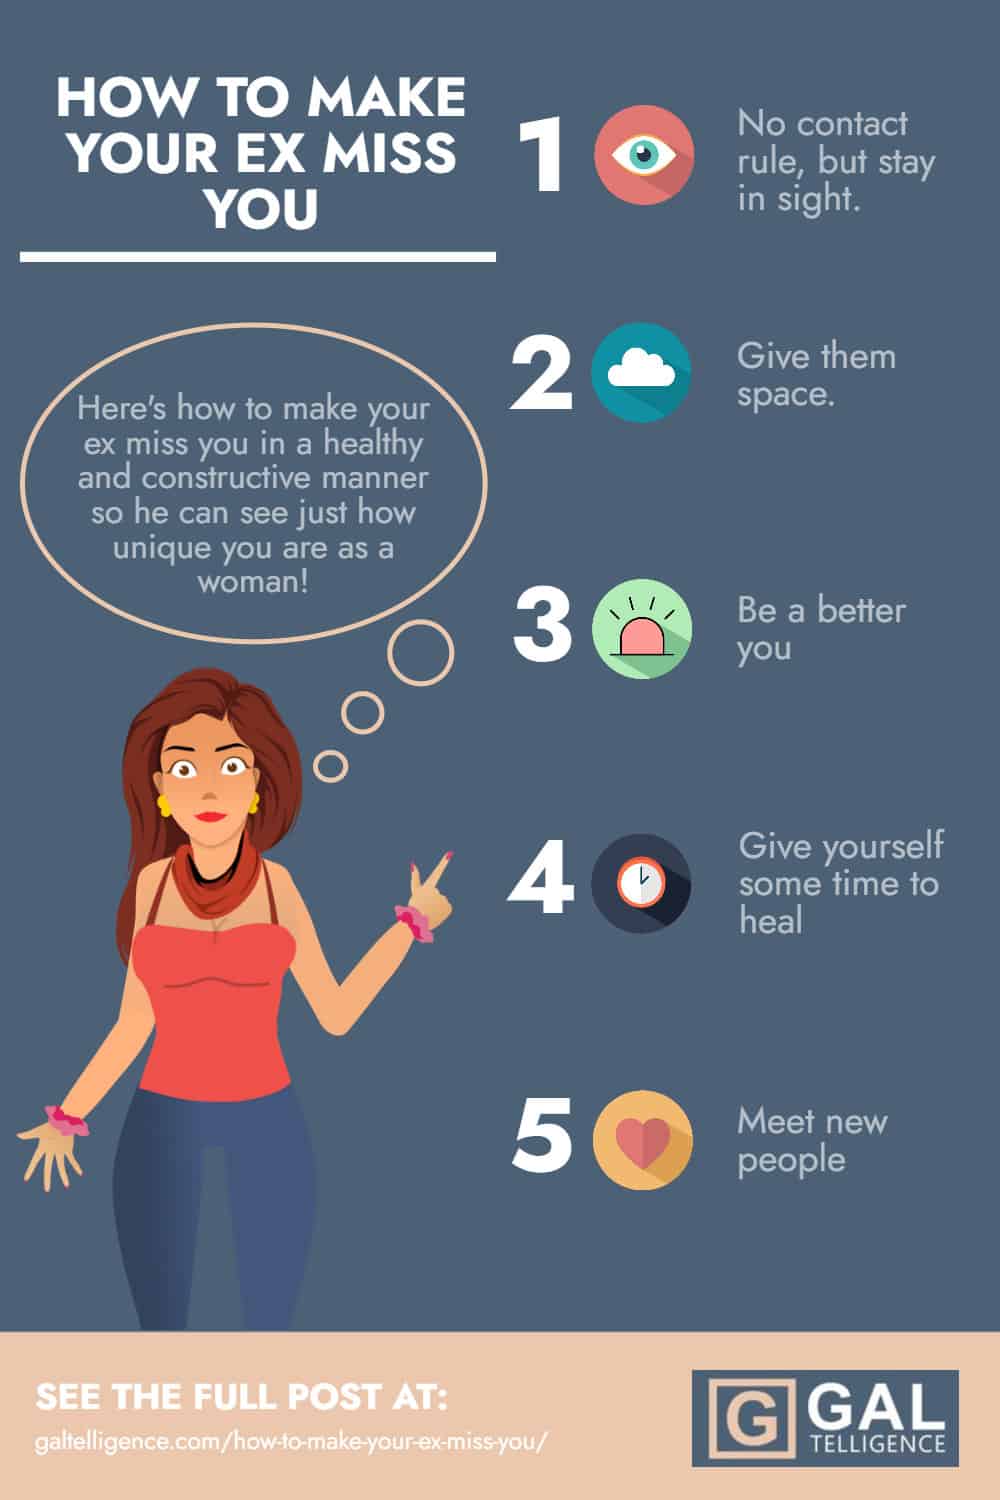 How to make your ex miss you - Infographic